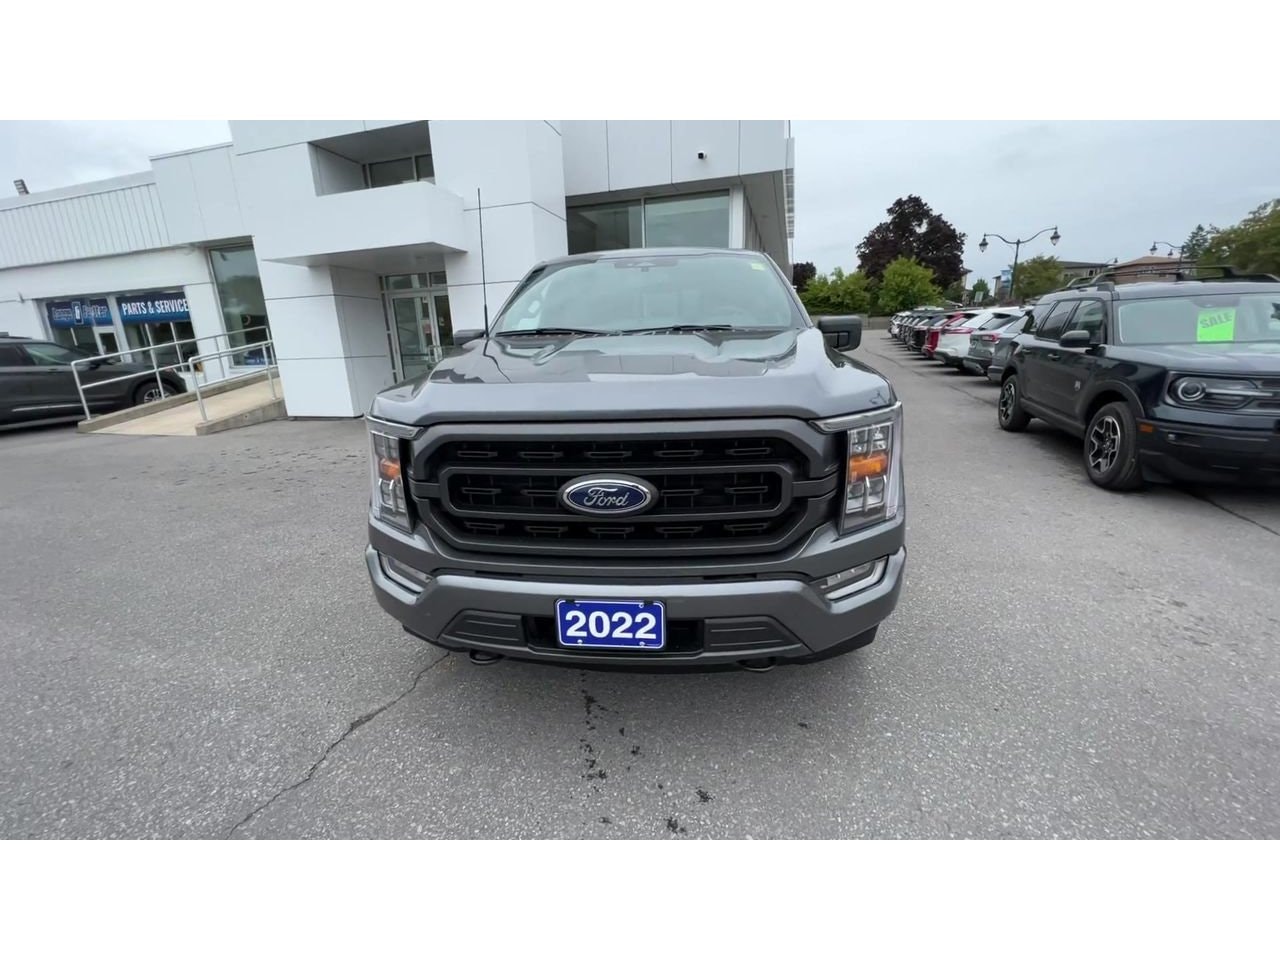 2022 Ford F-150 - 20485A Full Image 3